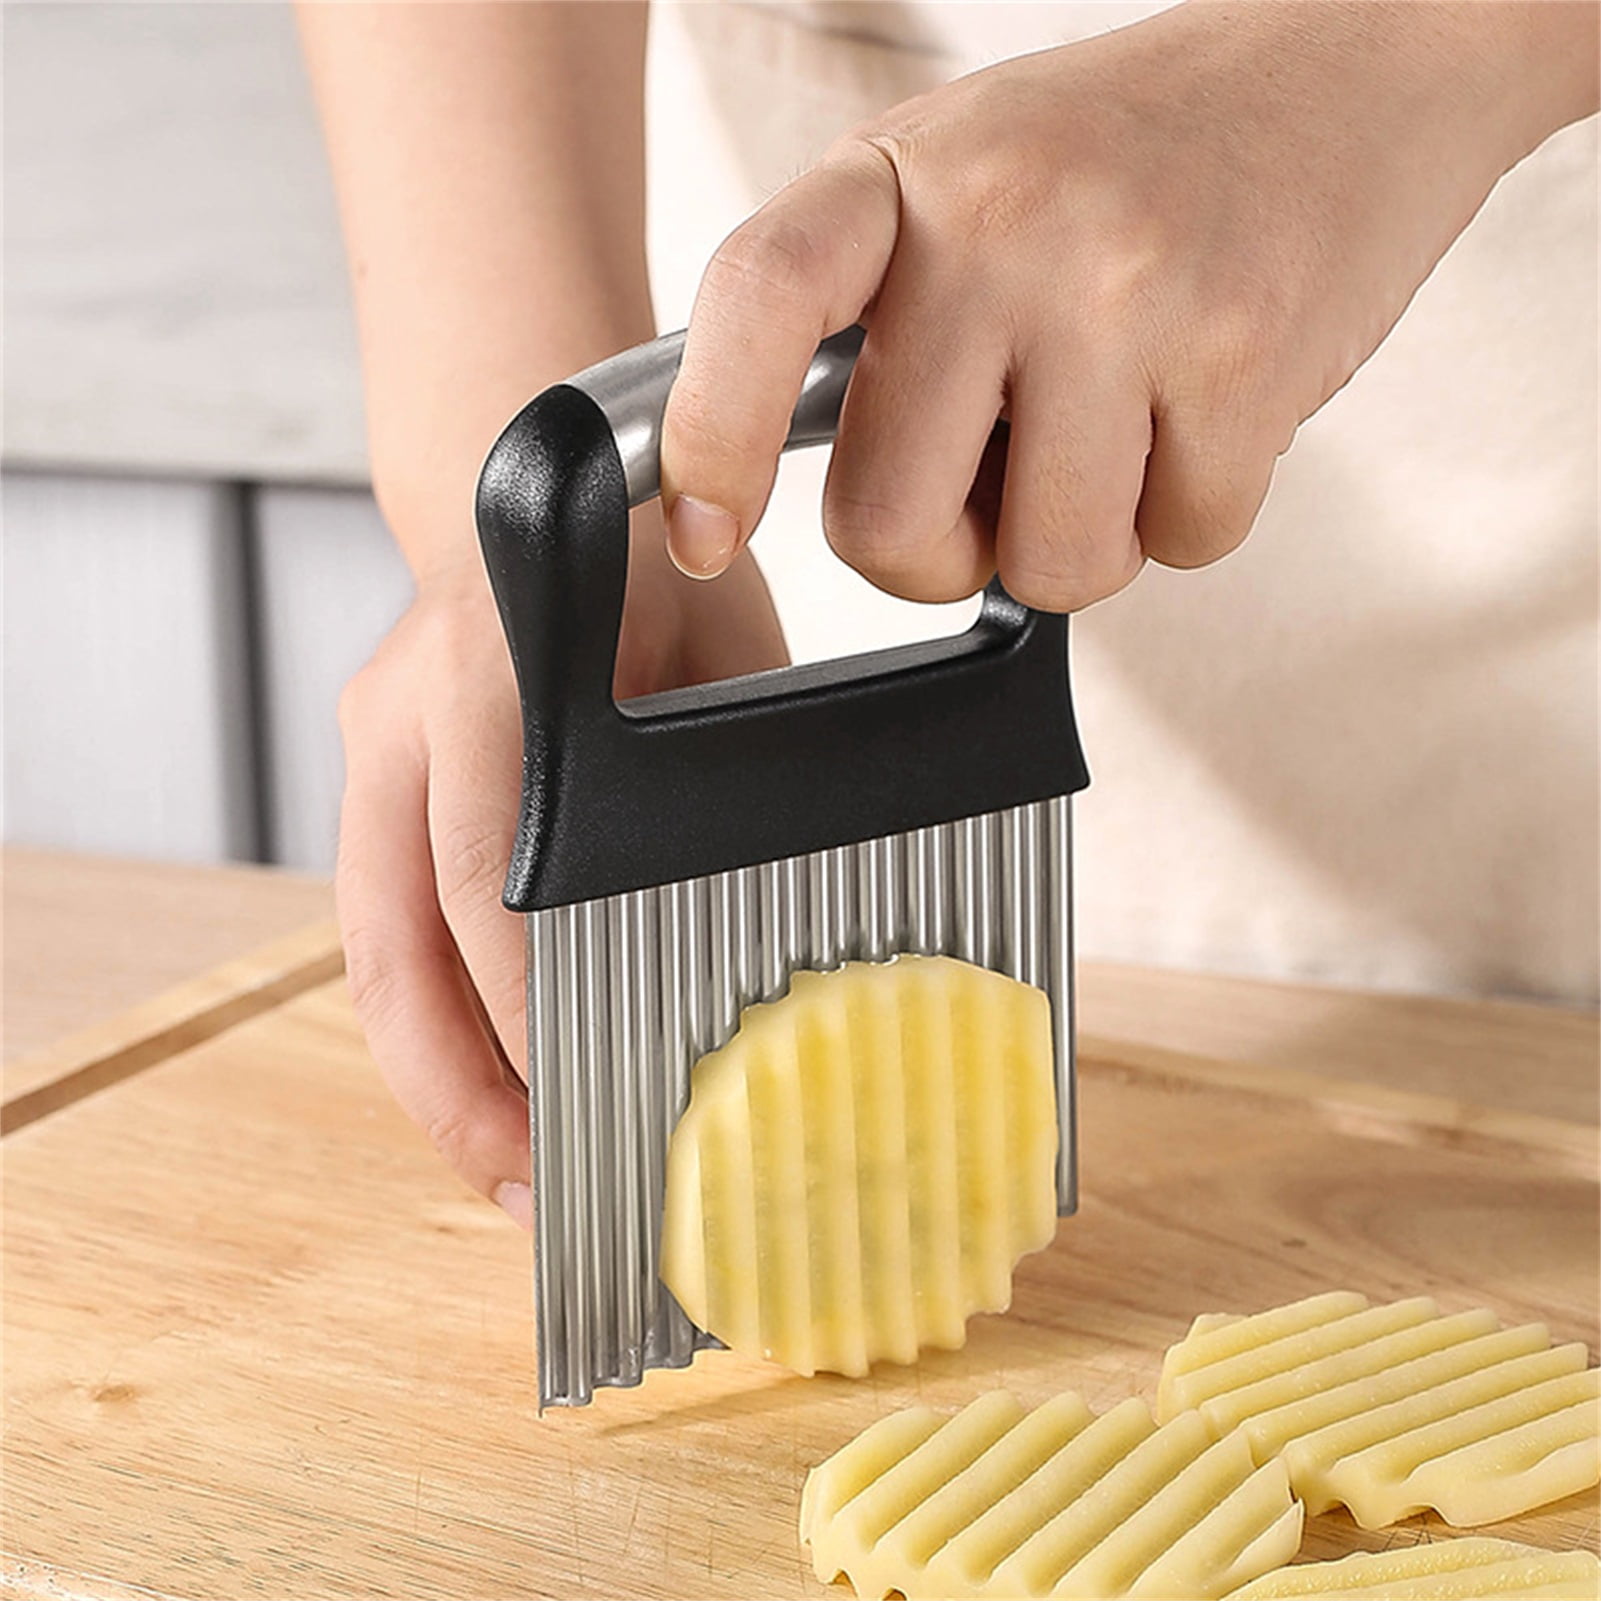 How to make crinkle-cut chips with a potato slicer machine?